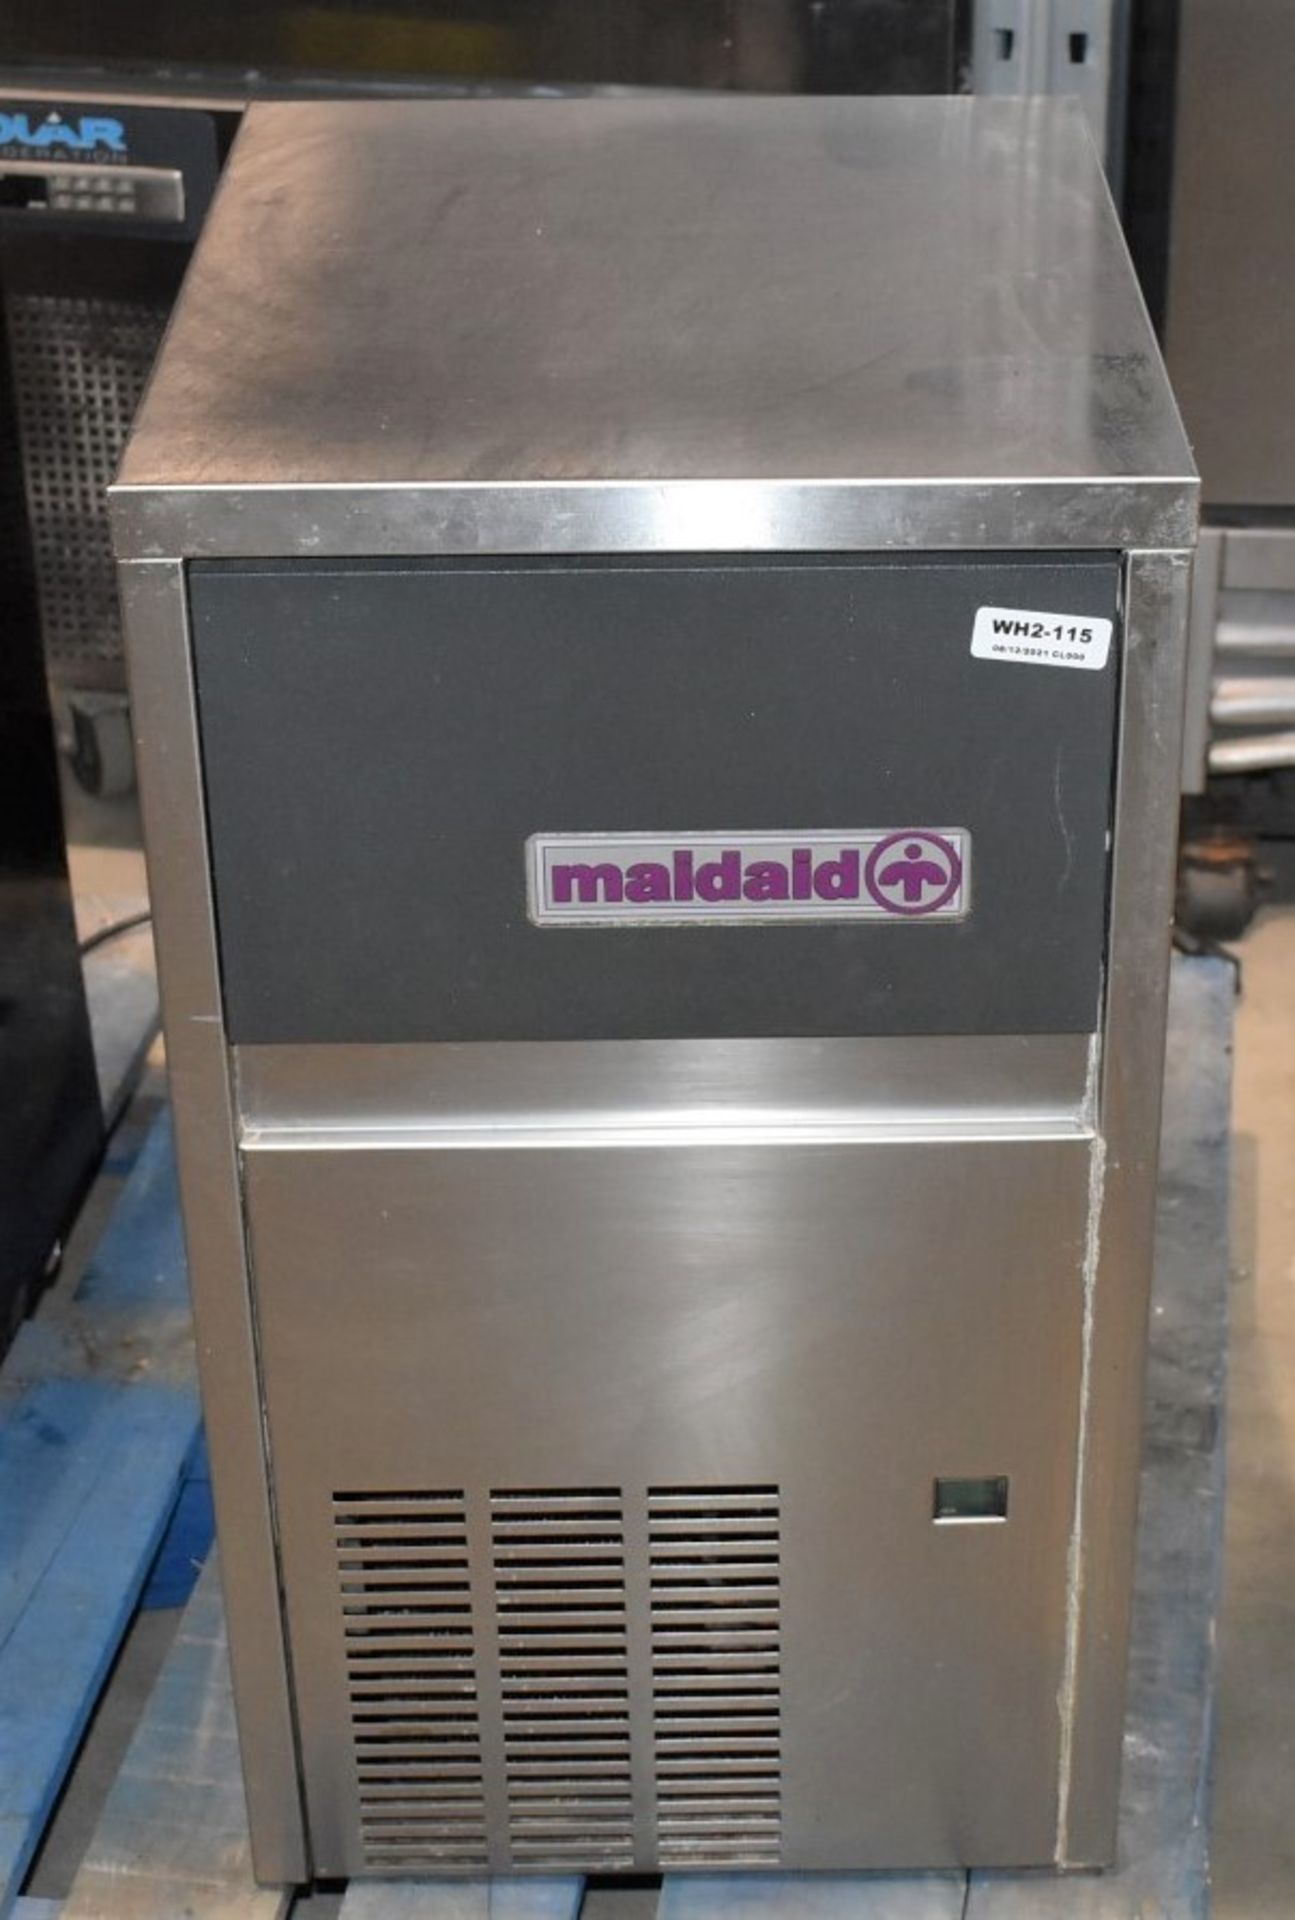 1 x Maidaid M30-10 Countertop Ice Machine With Stainless Steel Exterior - RRP £975 - Ref: WH2-115